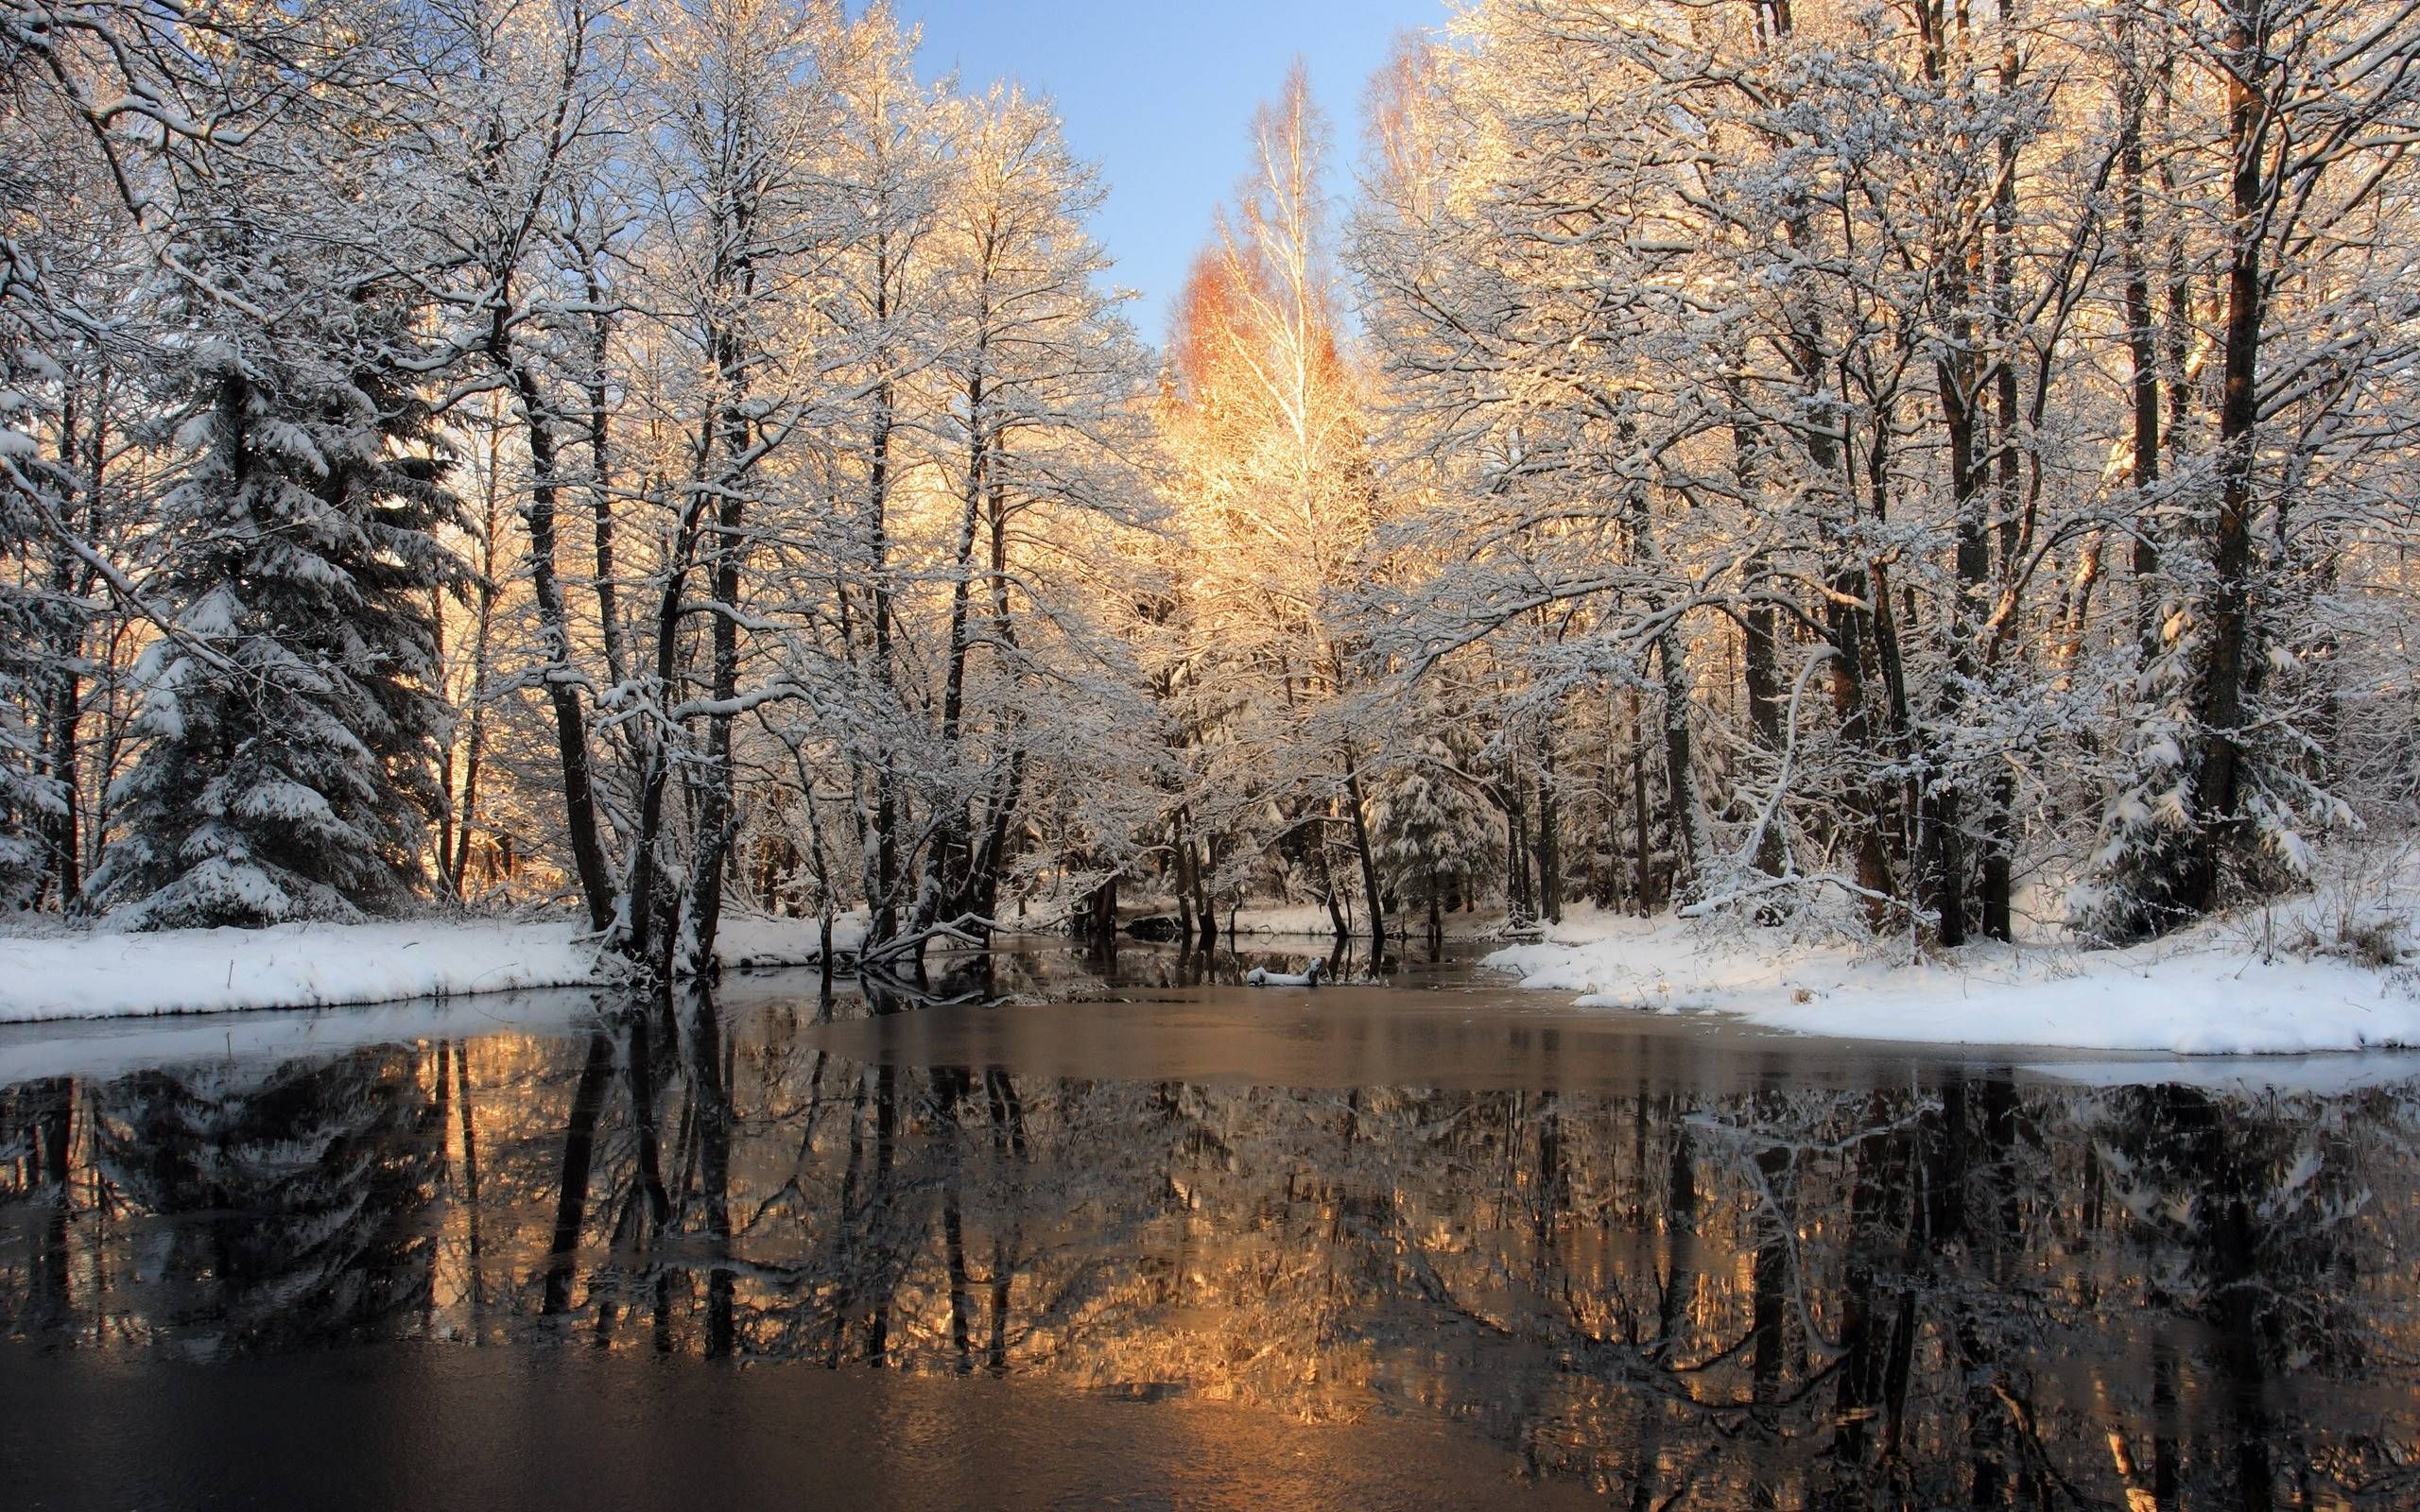 Winter Nature Wallpaper Background with HD Wallpaper.com. Winter wallpaper, Winter photography, Winter scenes